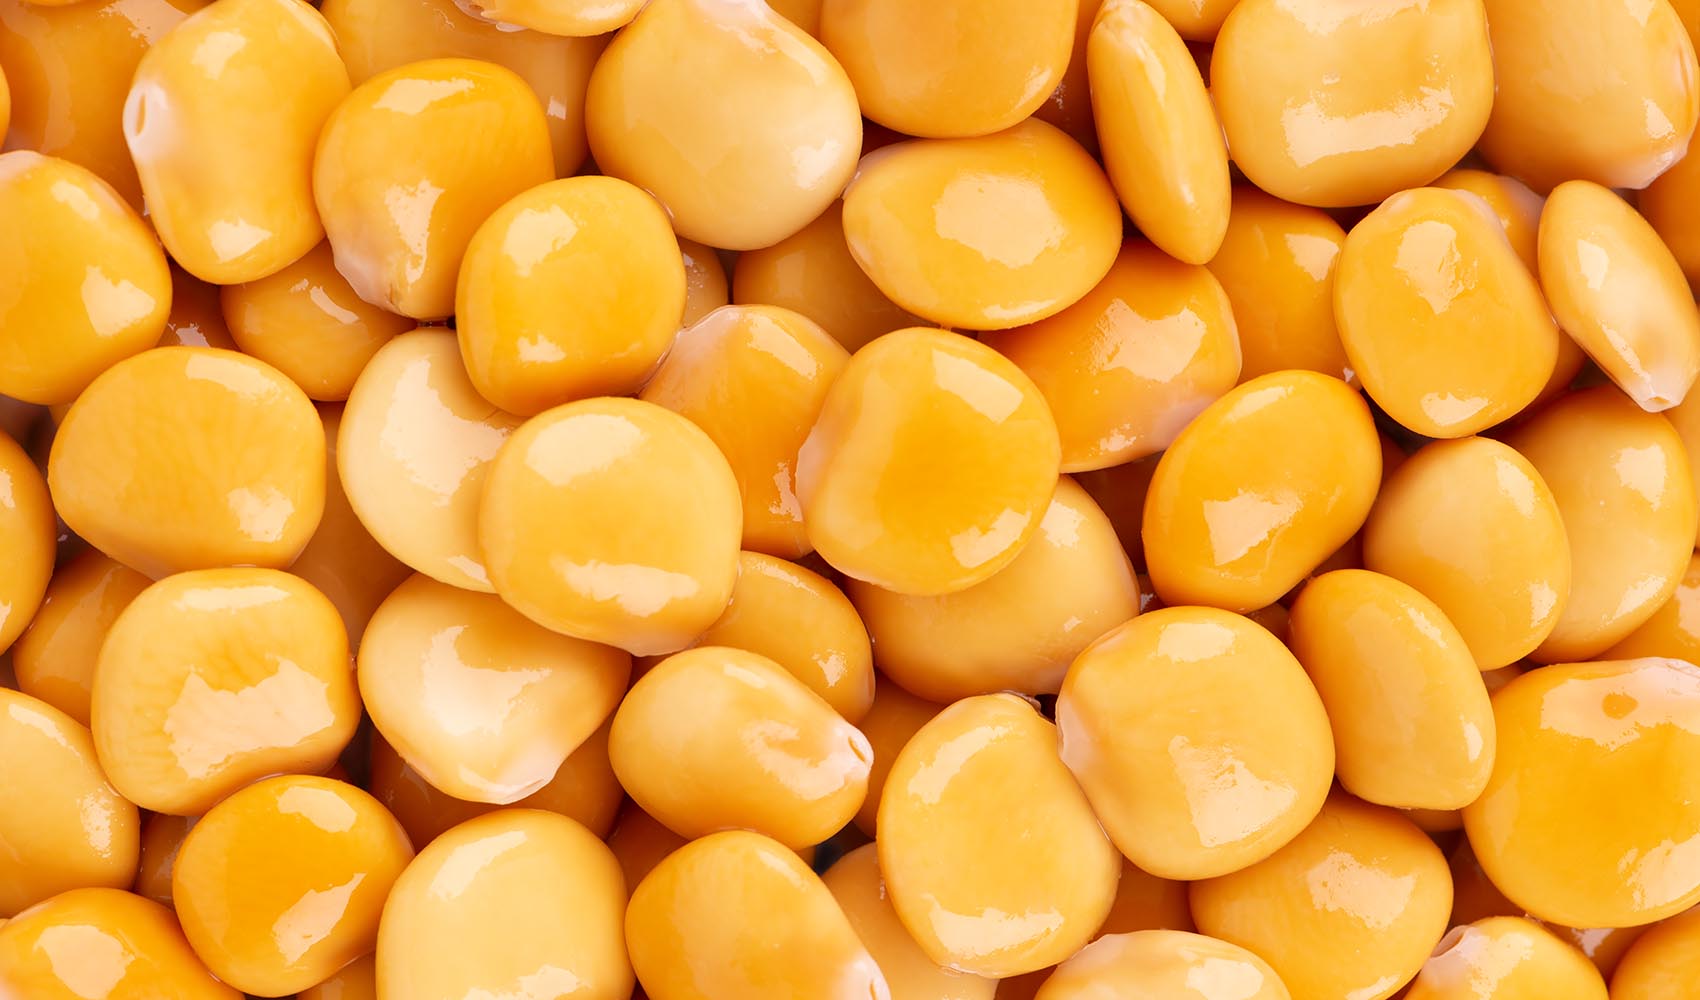 Lupini-Beans-the-Health-Benefits-and-Ways-of-Consuming-Them-1